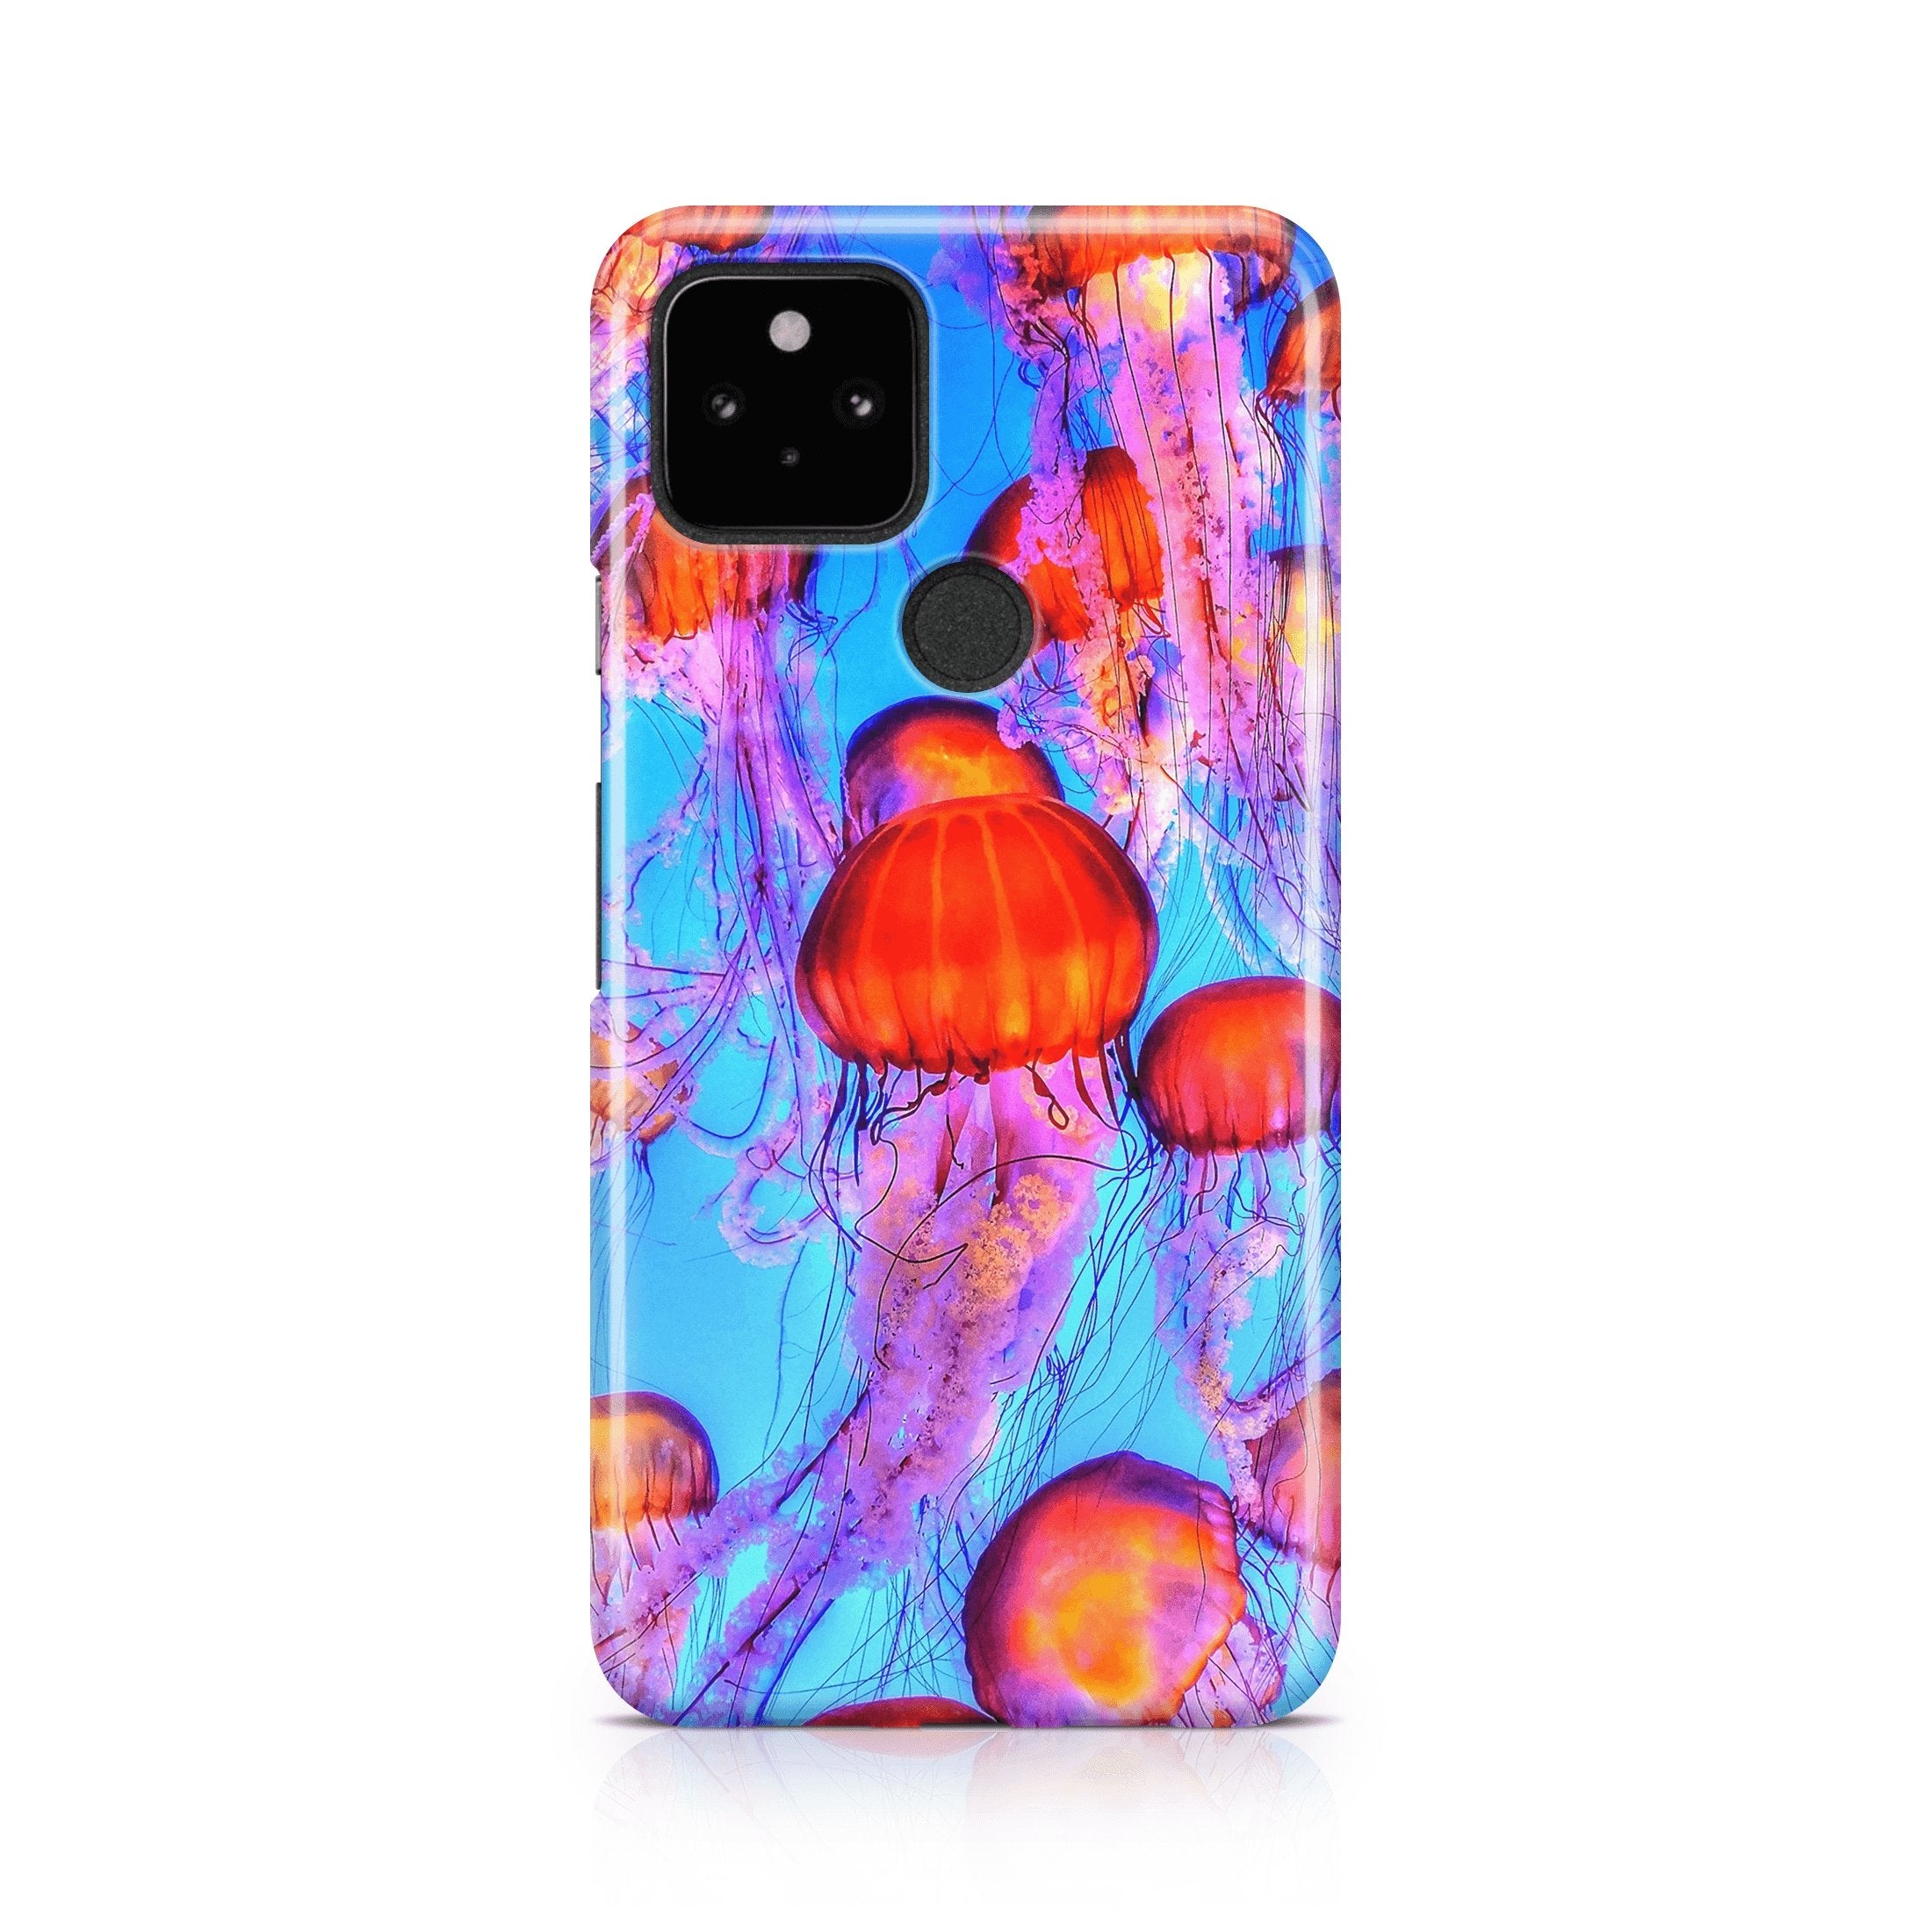 Jellyfish - Google phone case designs by CaseSwagger